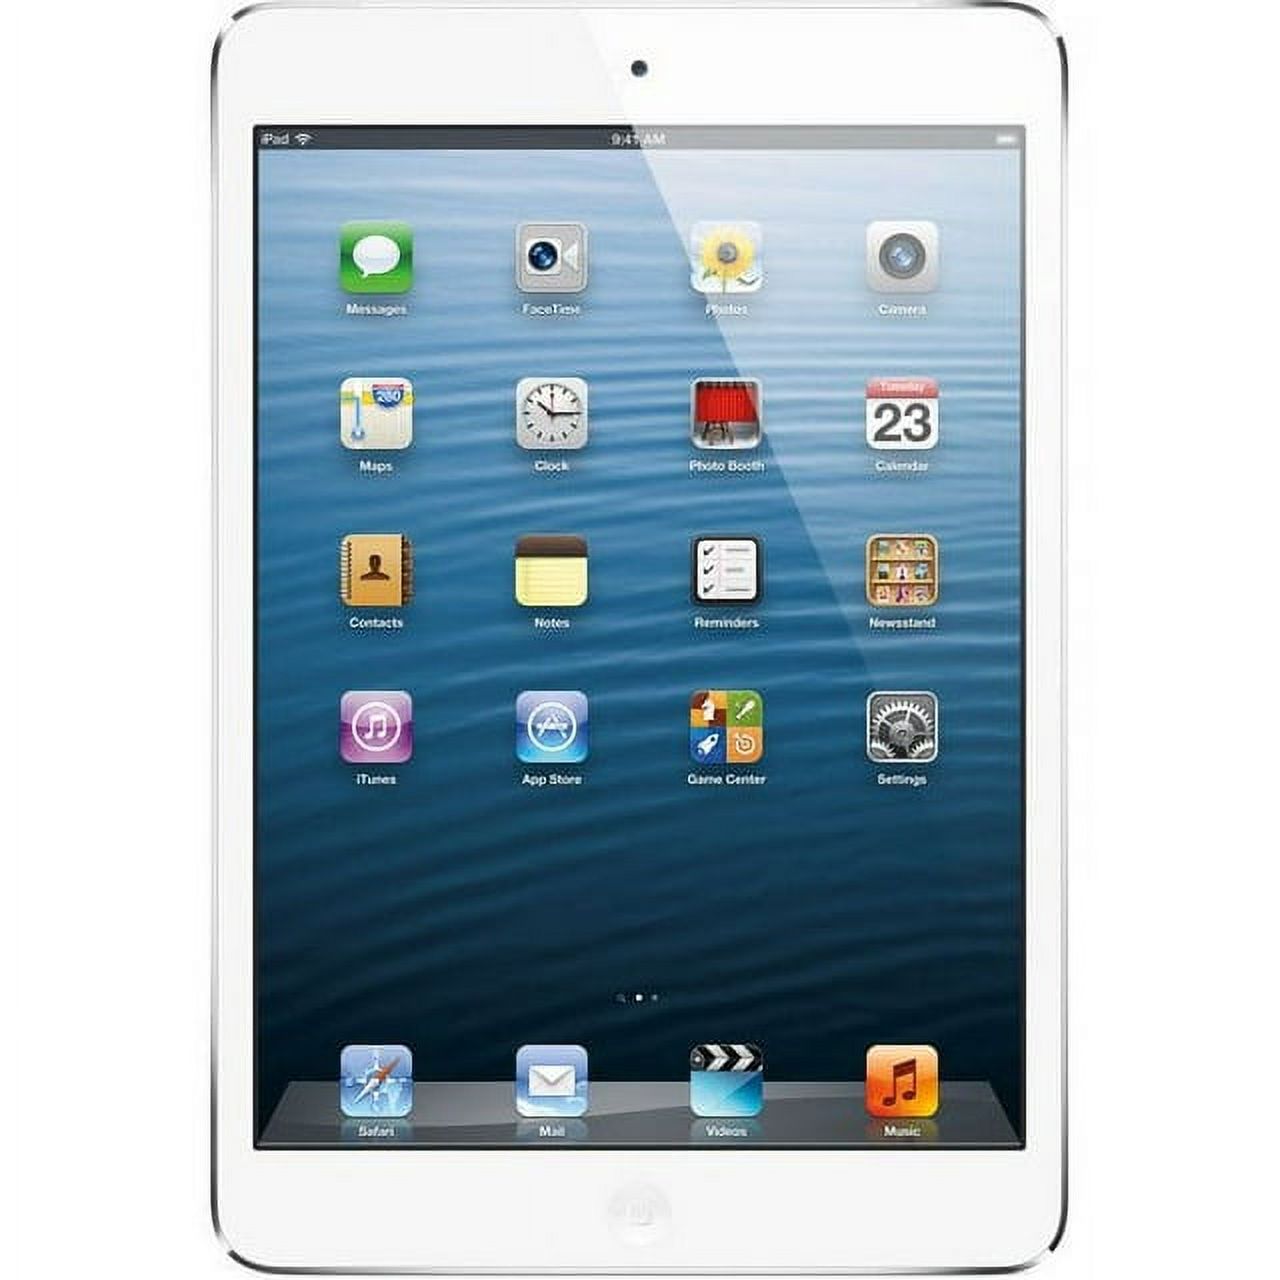 Restored Apple iPad Mini 16GB Wi-Fi 7.9" Tablet with FaceTime (White) - MD531LL/A (Refurbished) - image 1 of 3